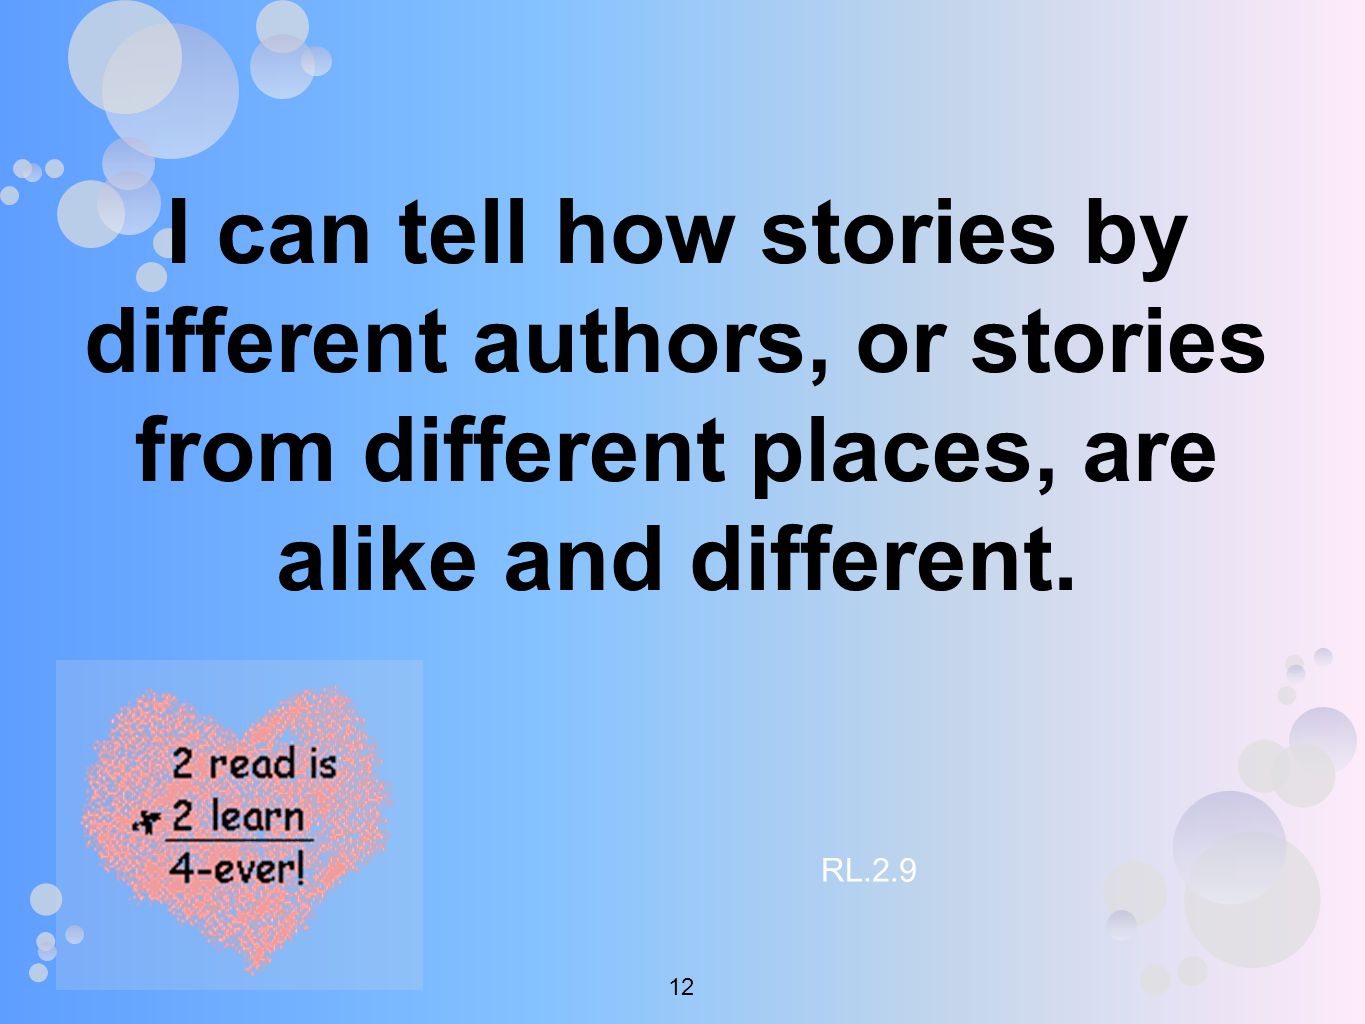 I can tell how stories by different authors, or stories from different places, are alike and different.